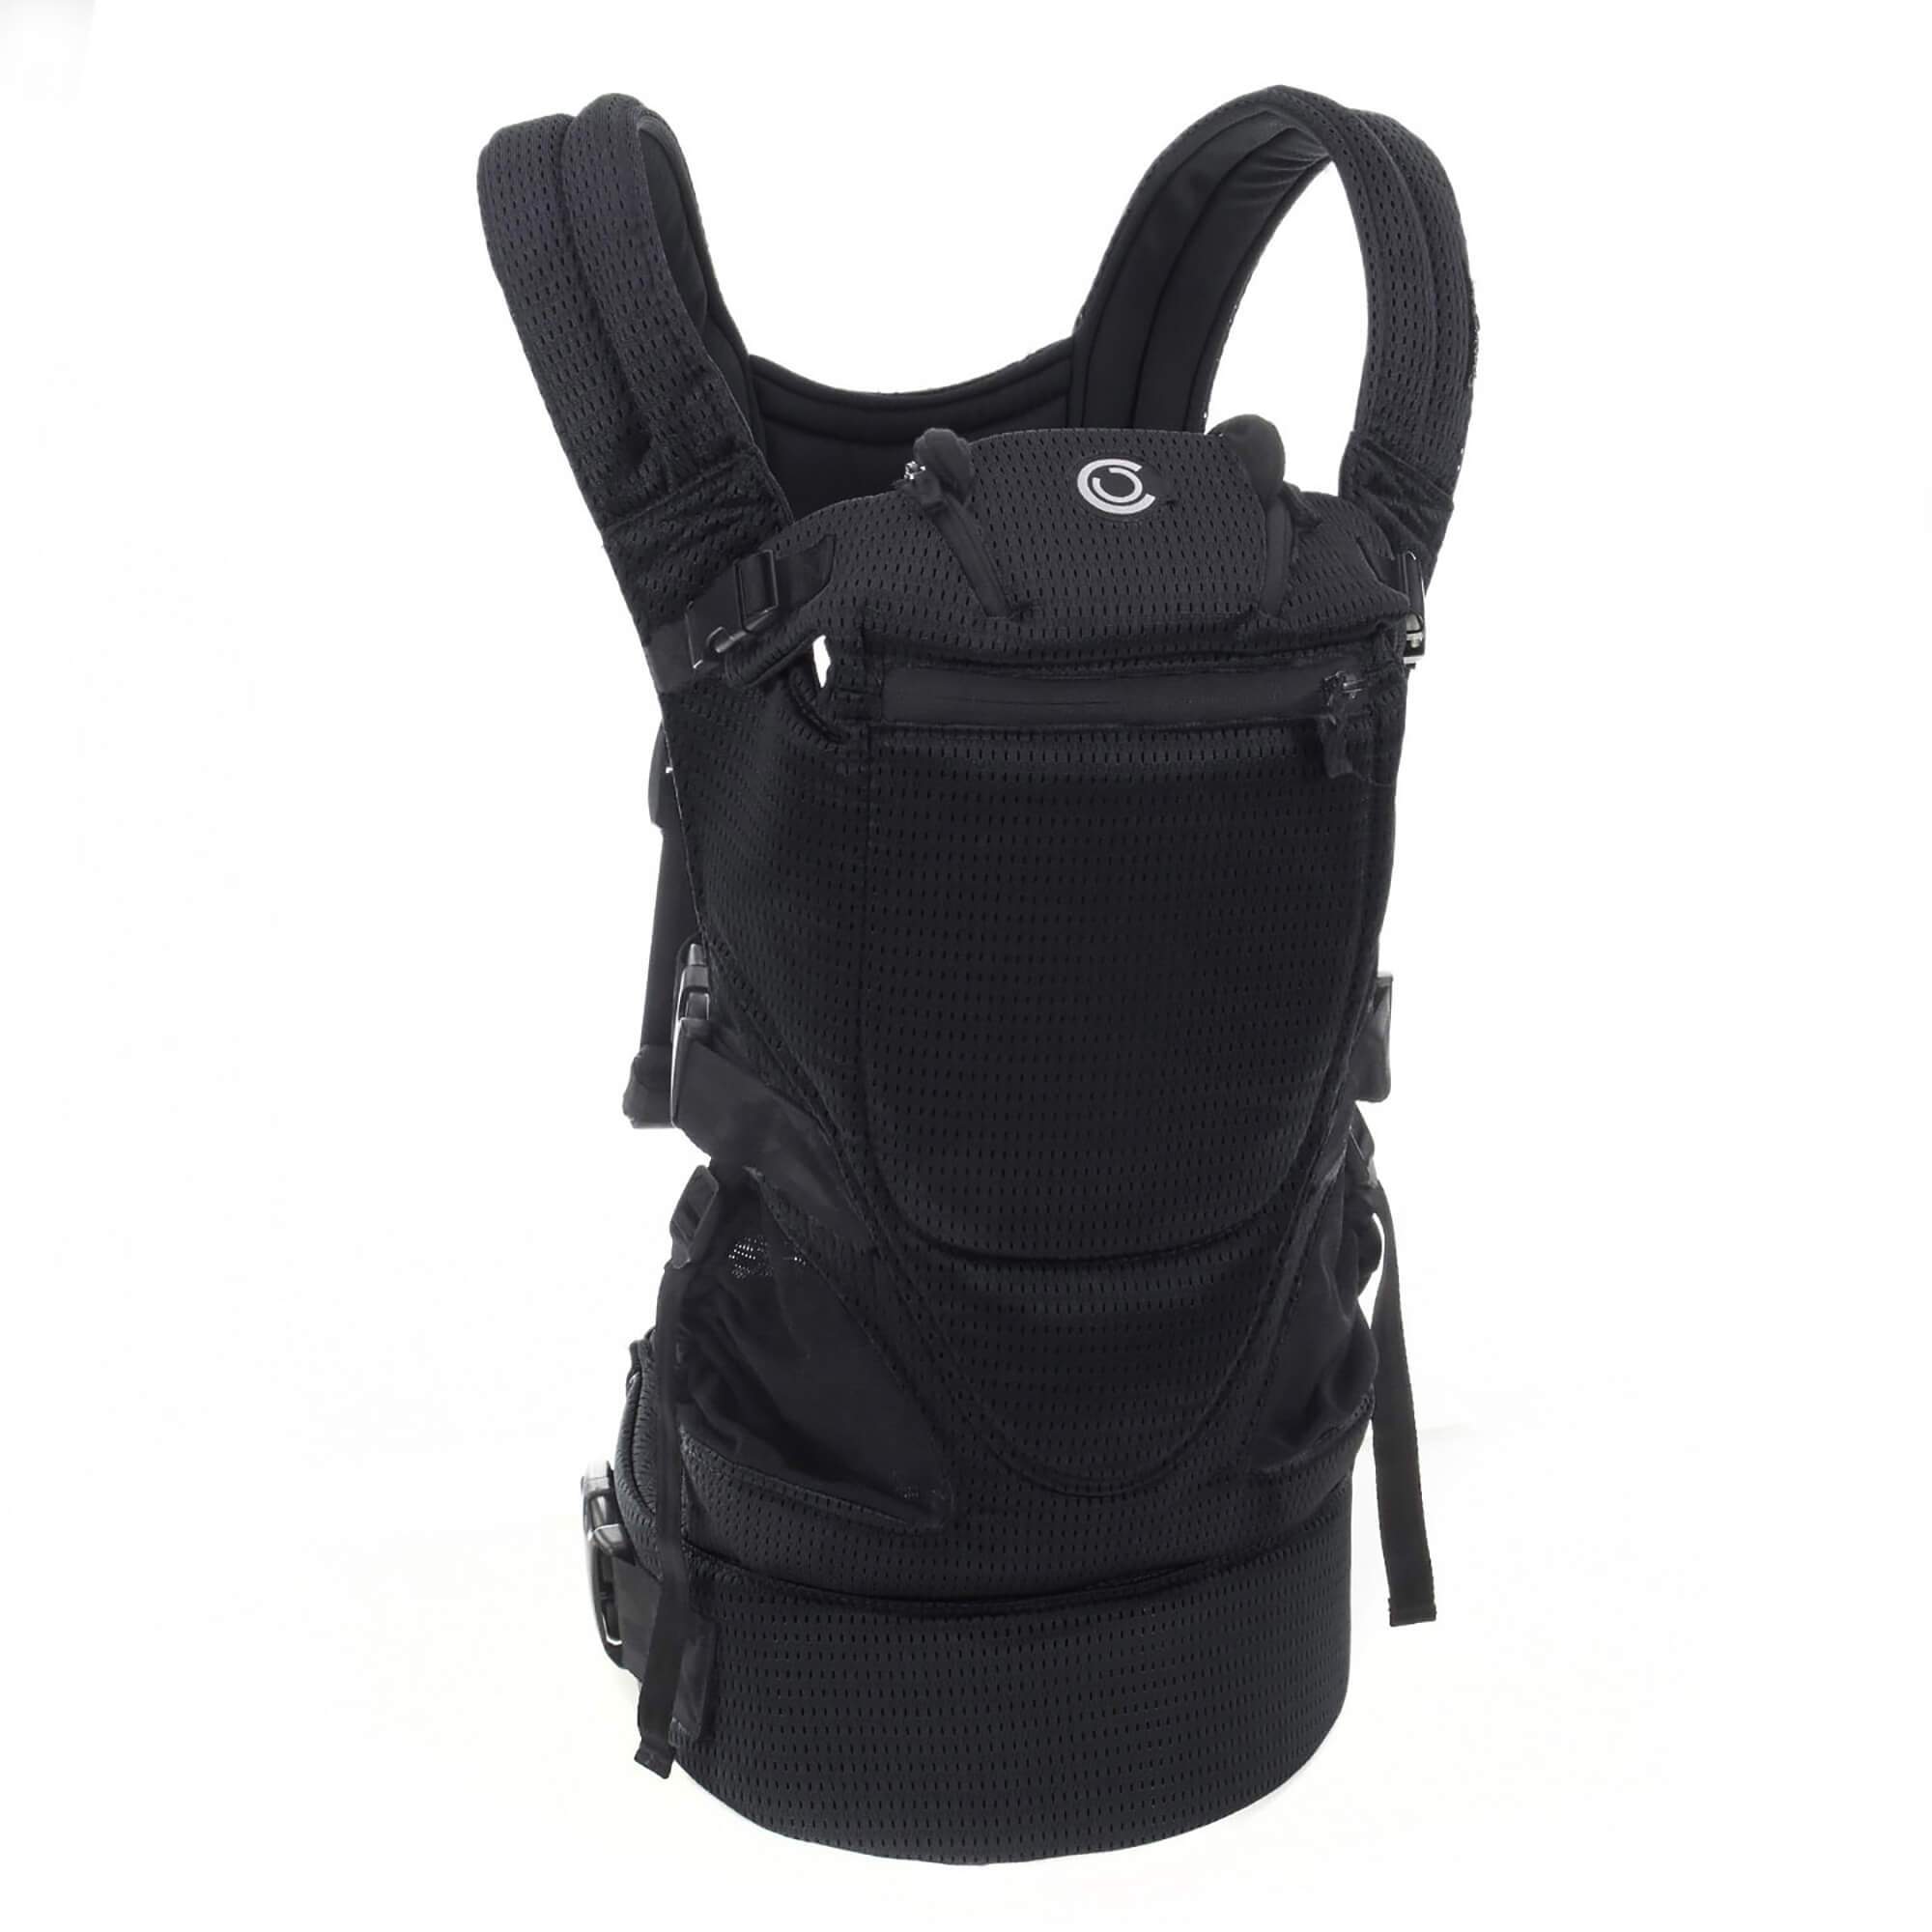 Contours Love 3-in-1 Baby Carrier - Black